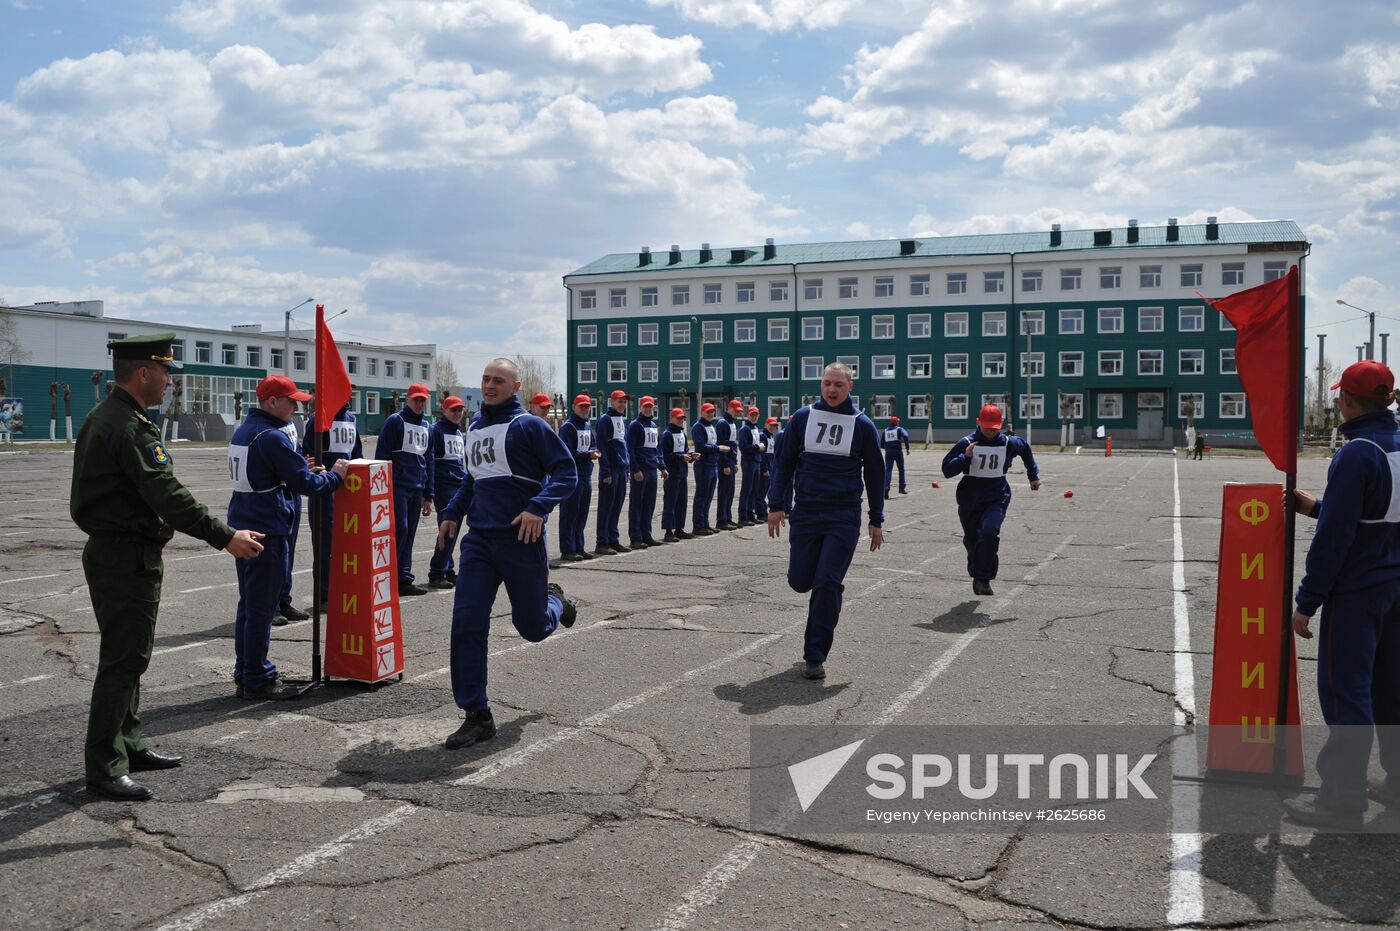 Eastern Military District Army School of Cookery in Trans-Baikal Territory